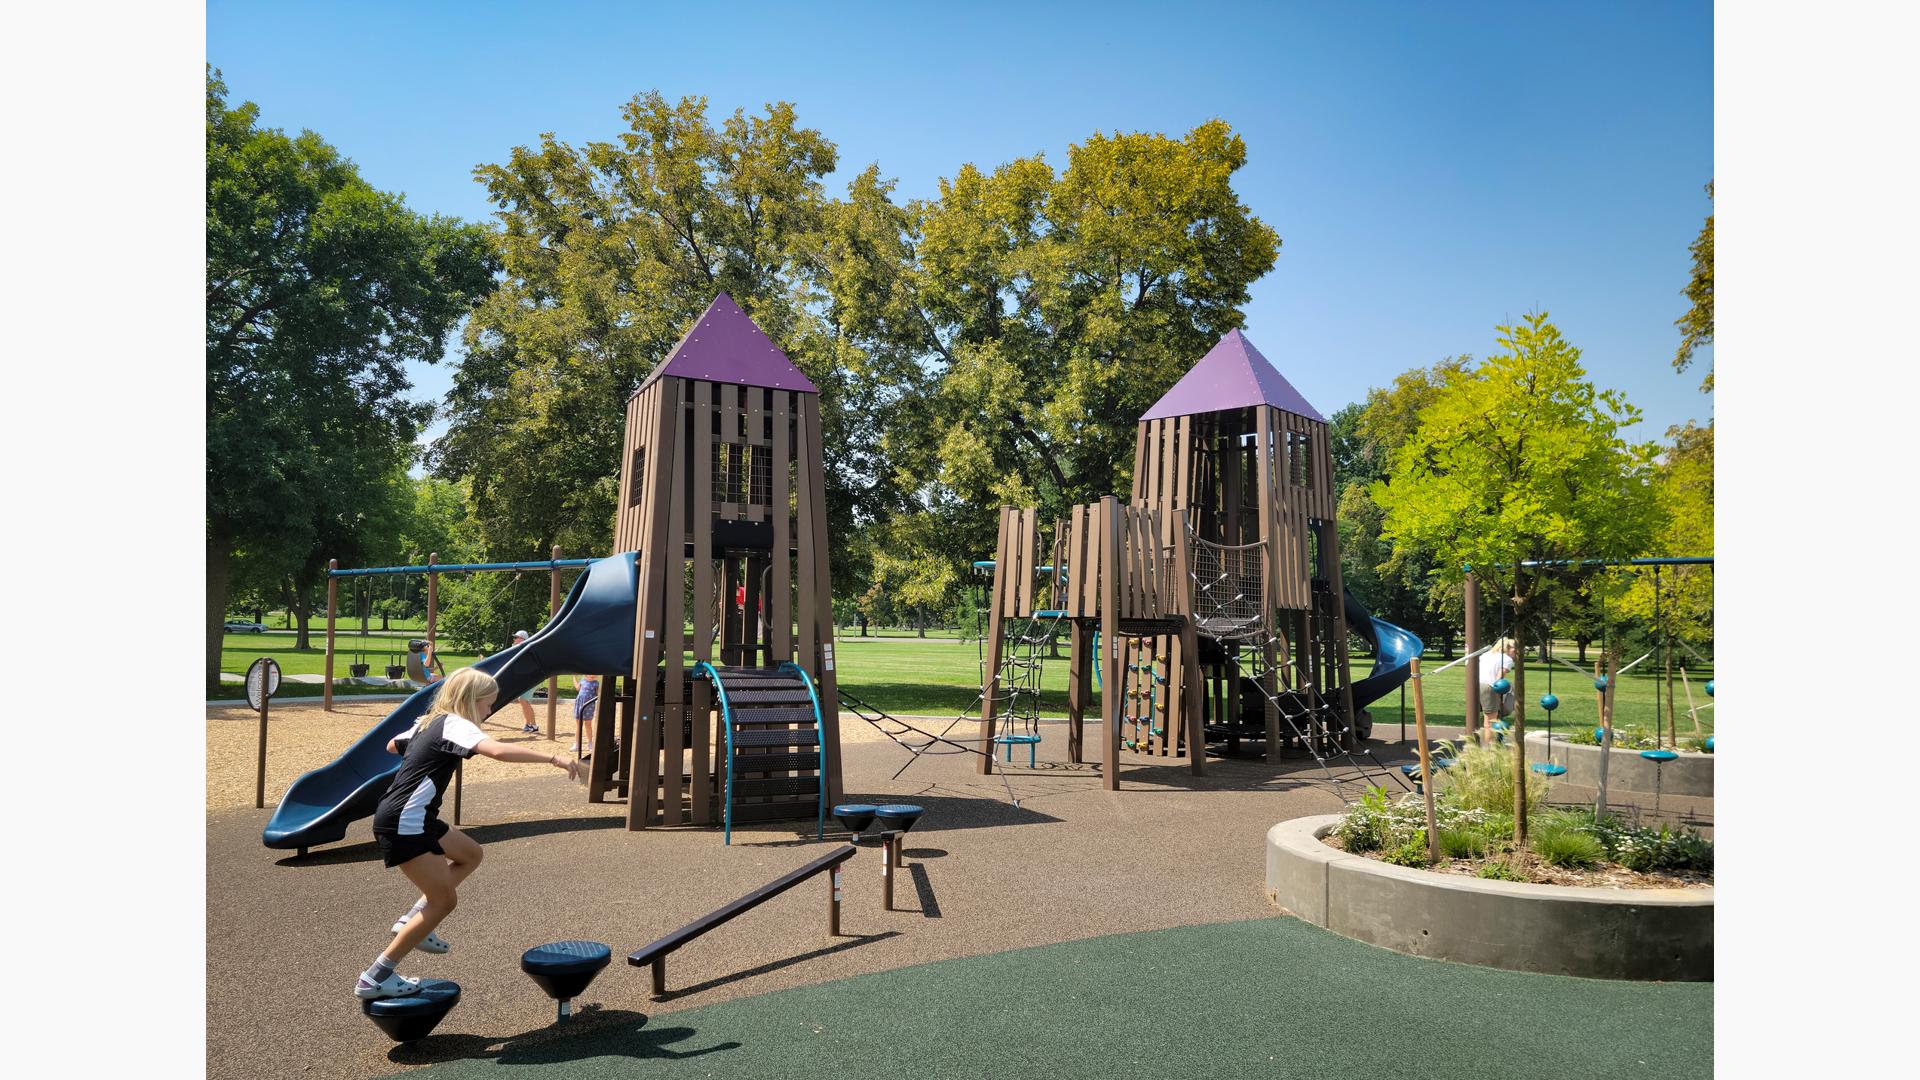 Two play structures connected by a rope ladder climber are designed like castle towers made up of recycled plastic lumber at an outdoor park.